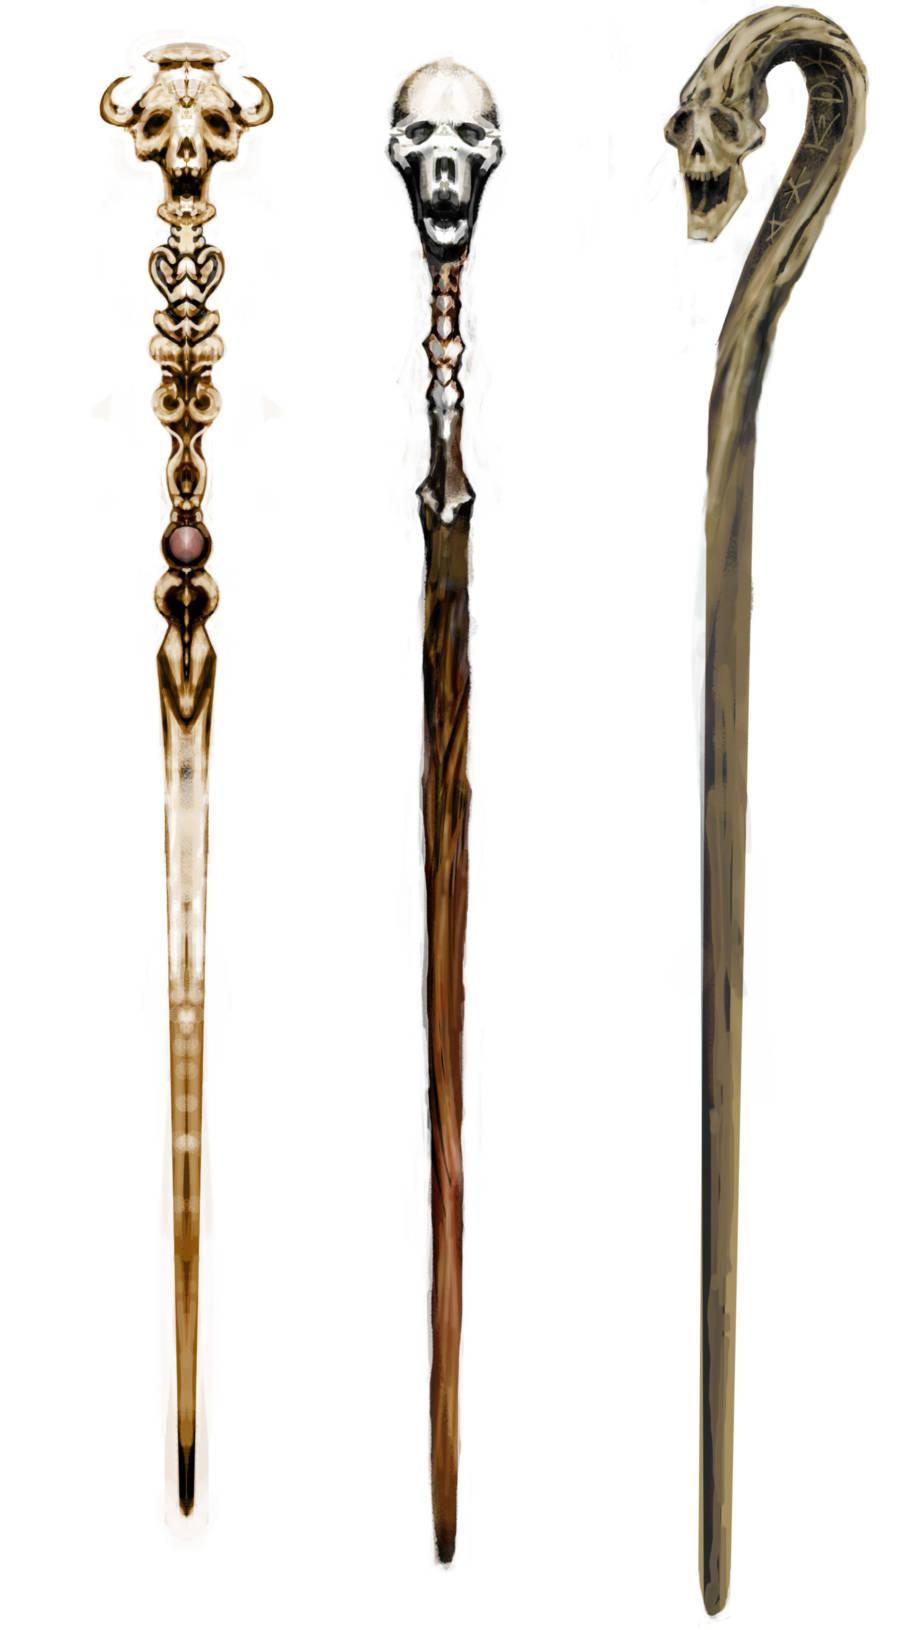 Three of the Death Eaters wands from the Goblet of Fire